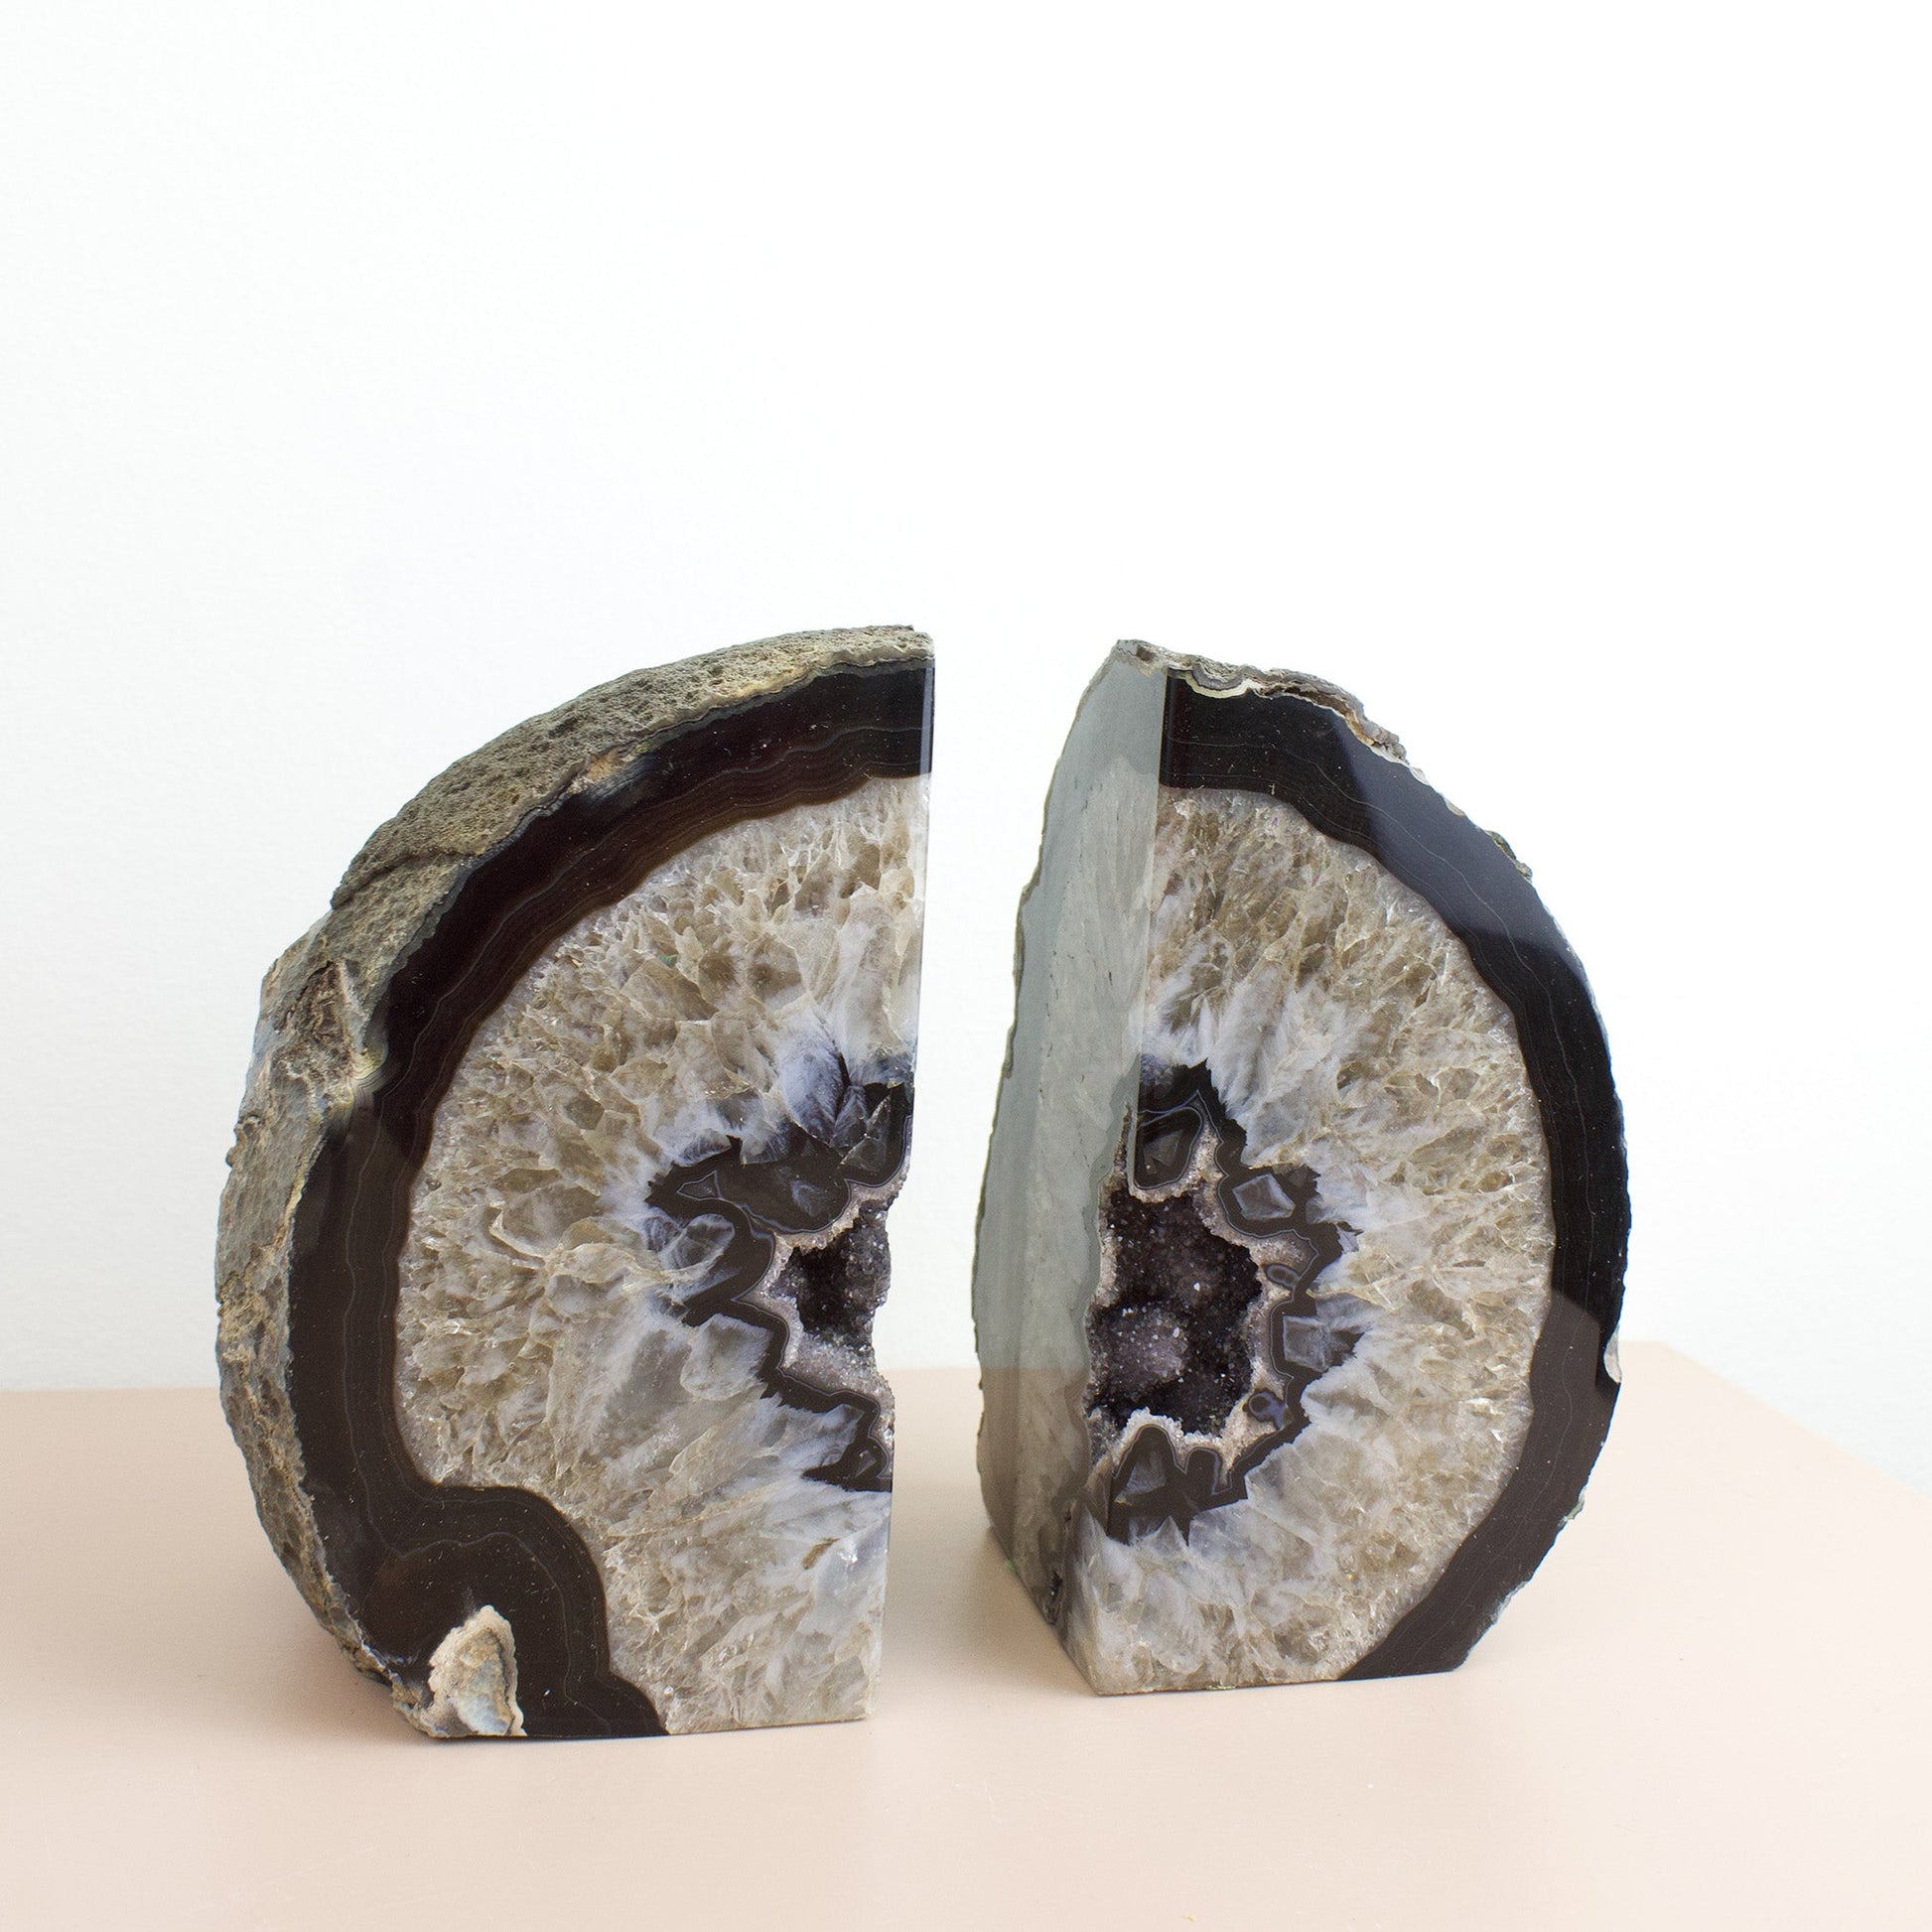 Black Agate Crystal Bookends #2 - Muse + Moonstone